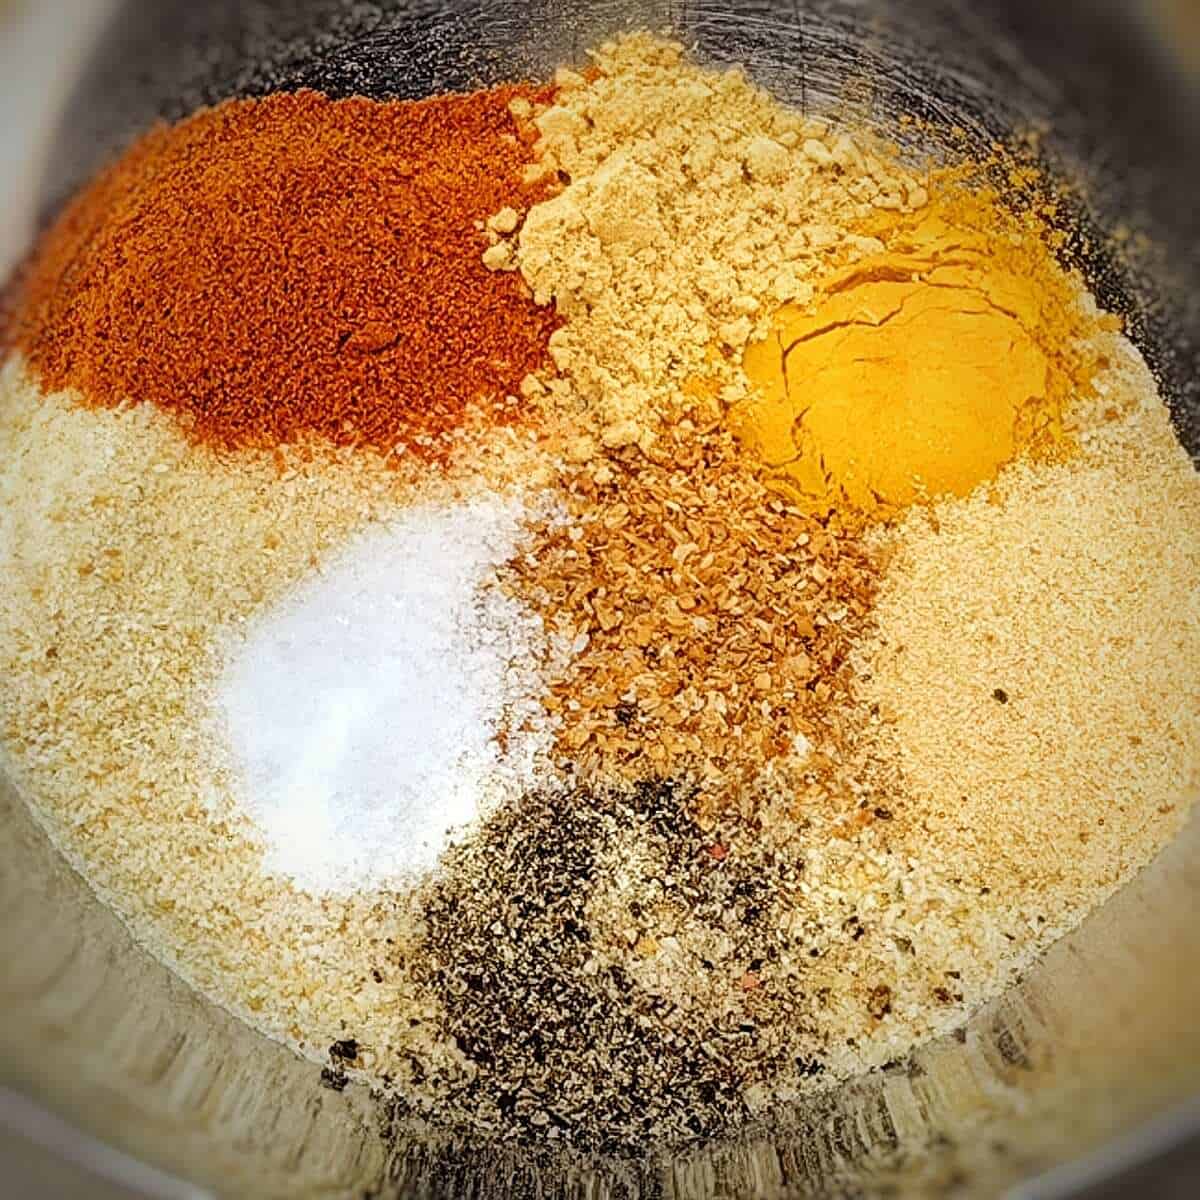 combine the breadcrumbs, seasonings and spices